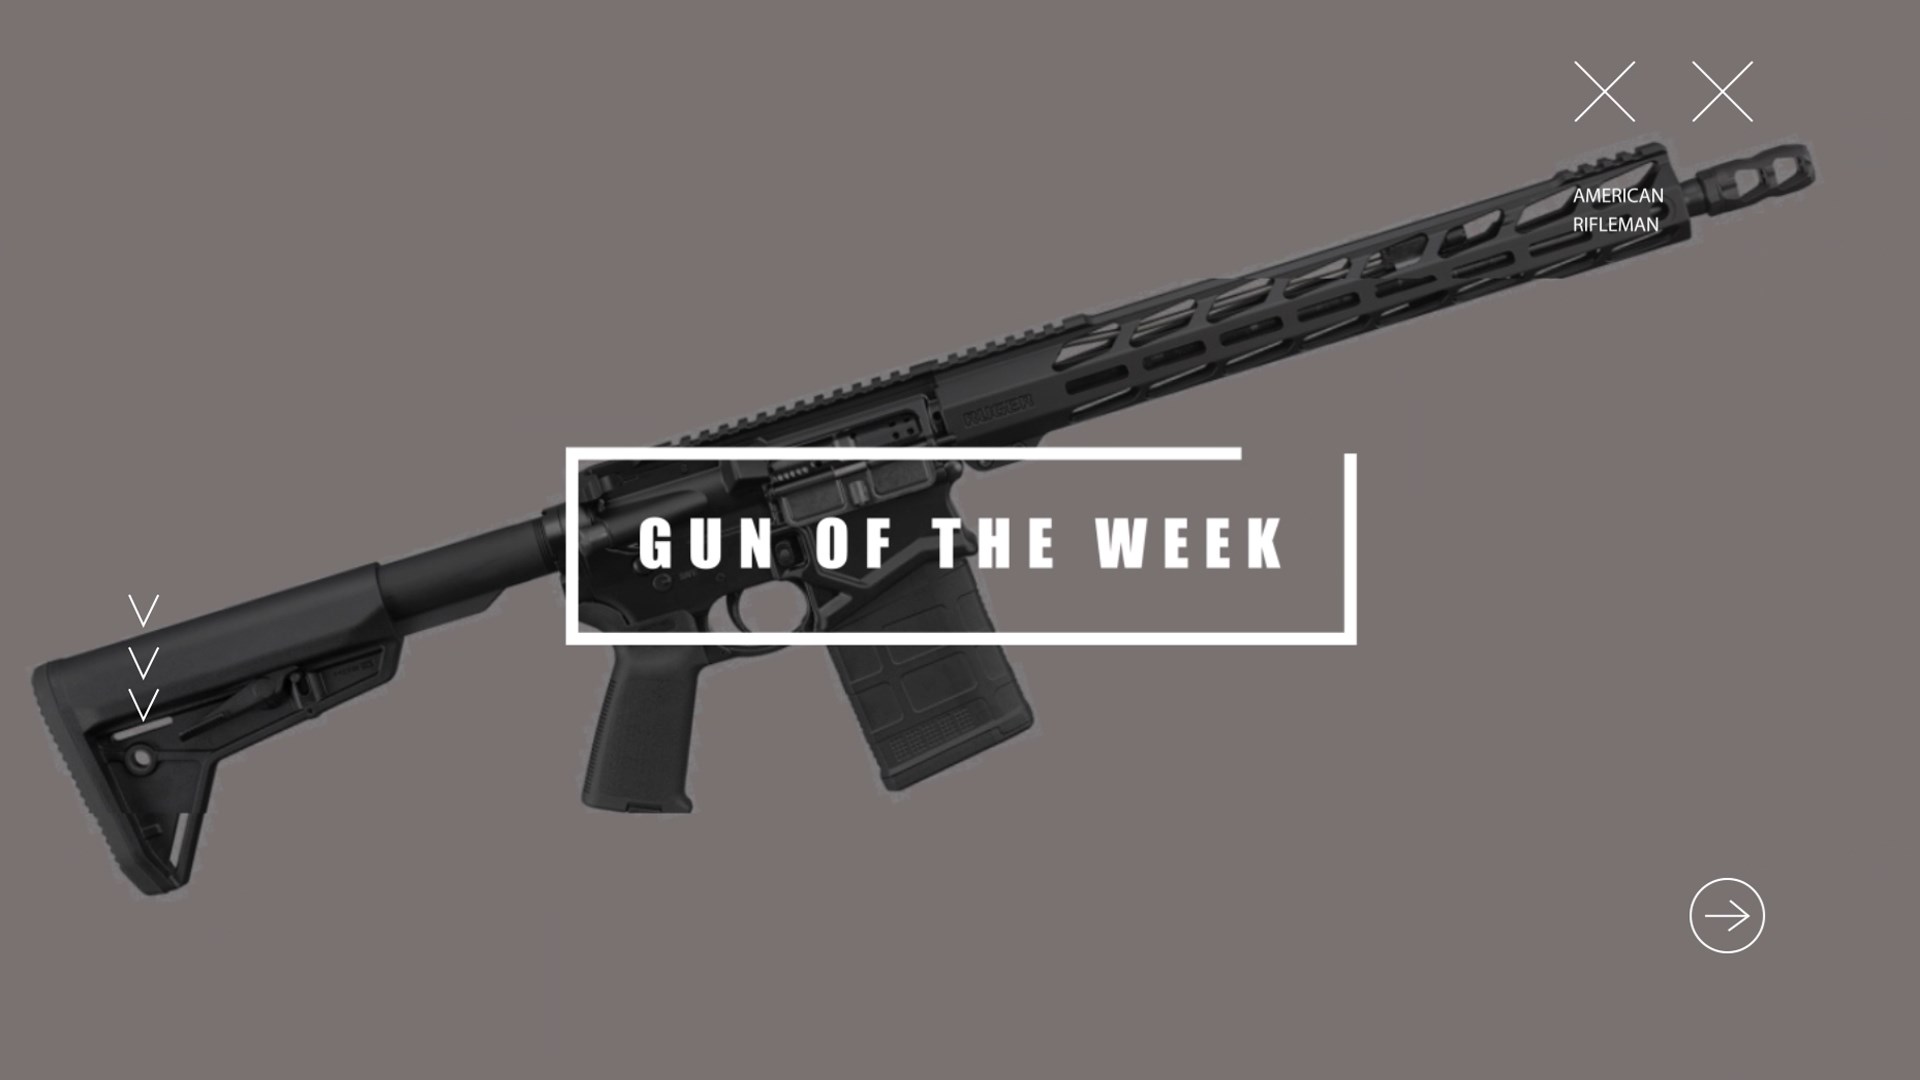 GUN OF THE WEEK title screen text overlay right-side view Ruger SFAR semi-automatic rifle black faded background